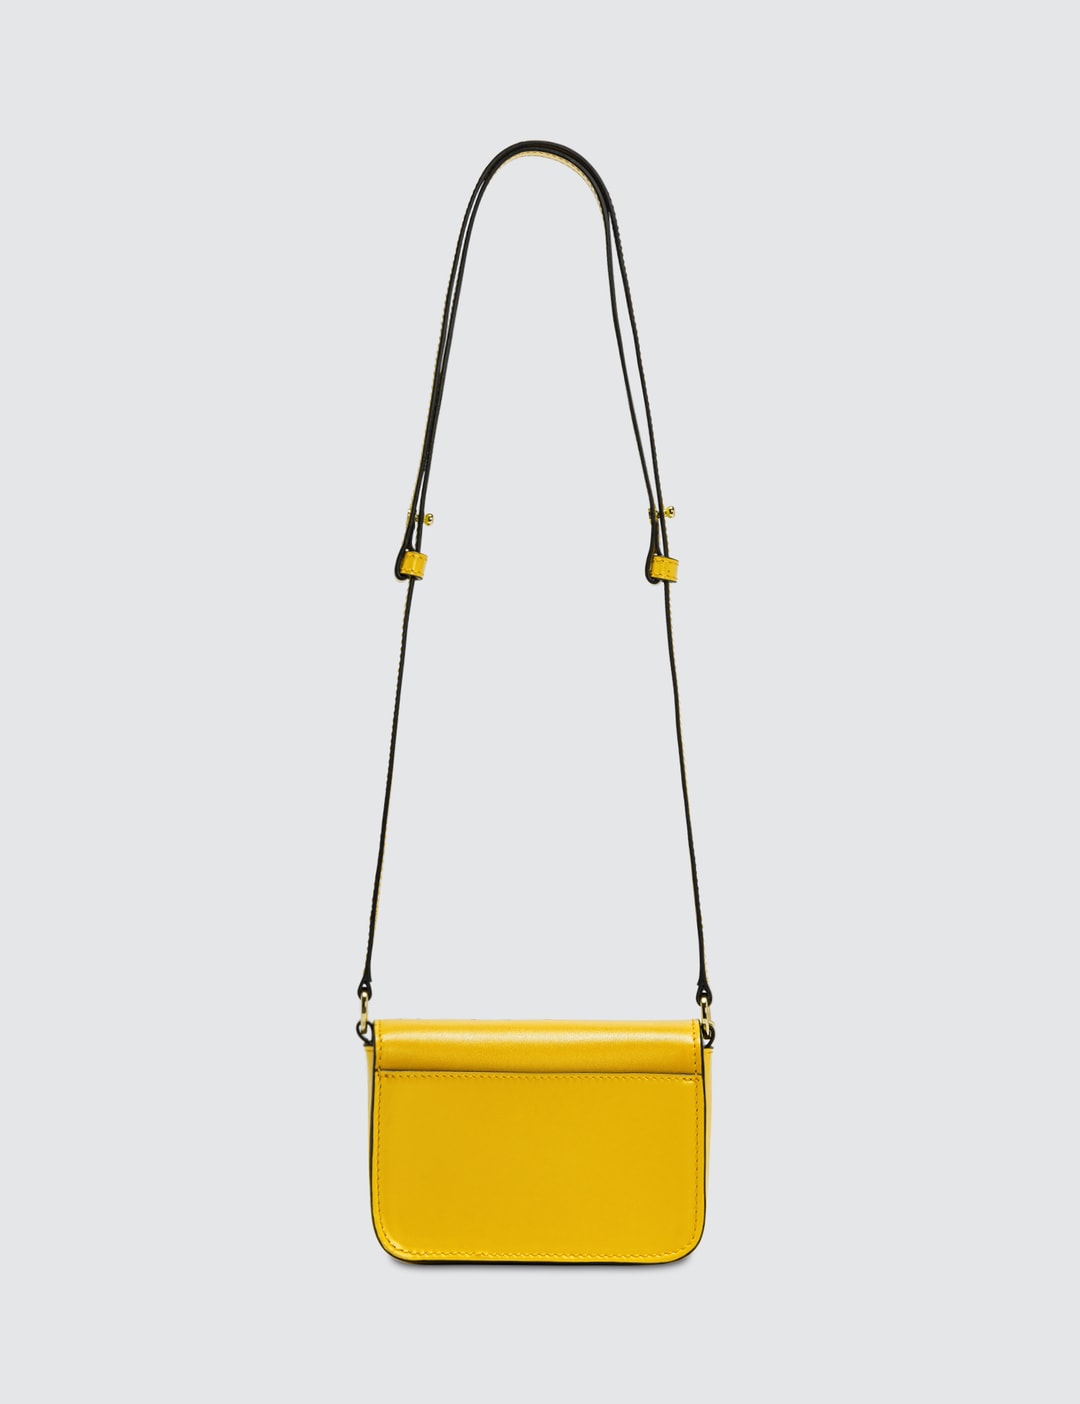 JW Anderson - Nano Key Leather Cross Body Bag | HBX - Globally Curated ...